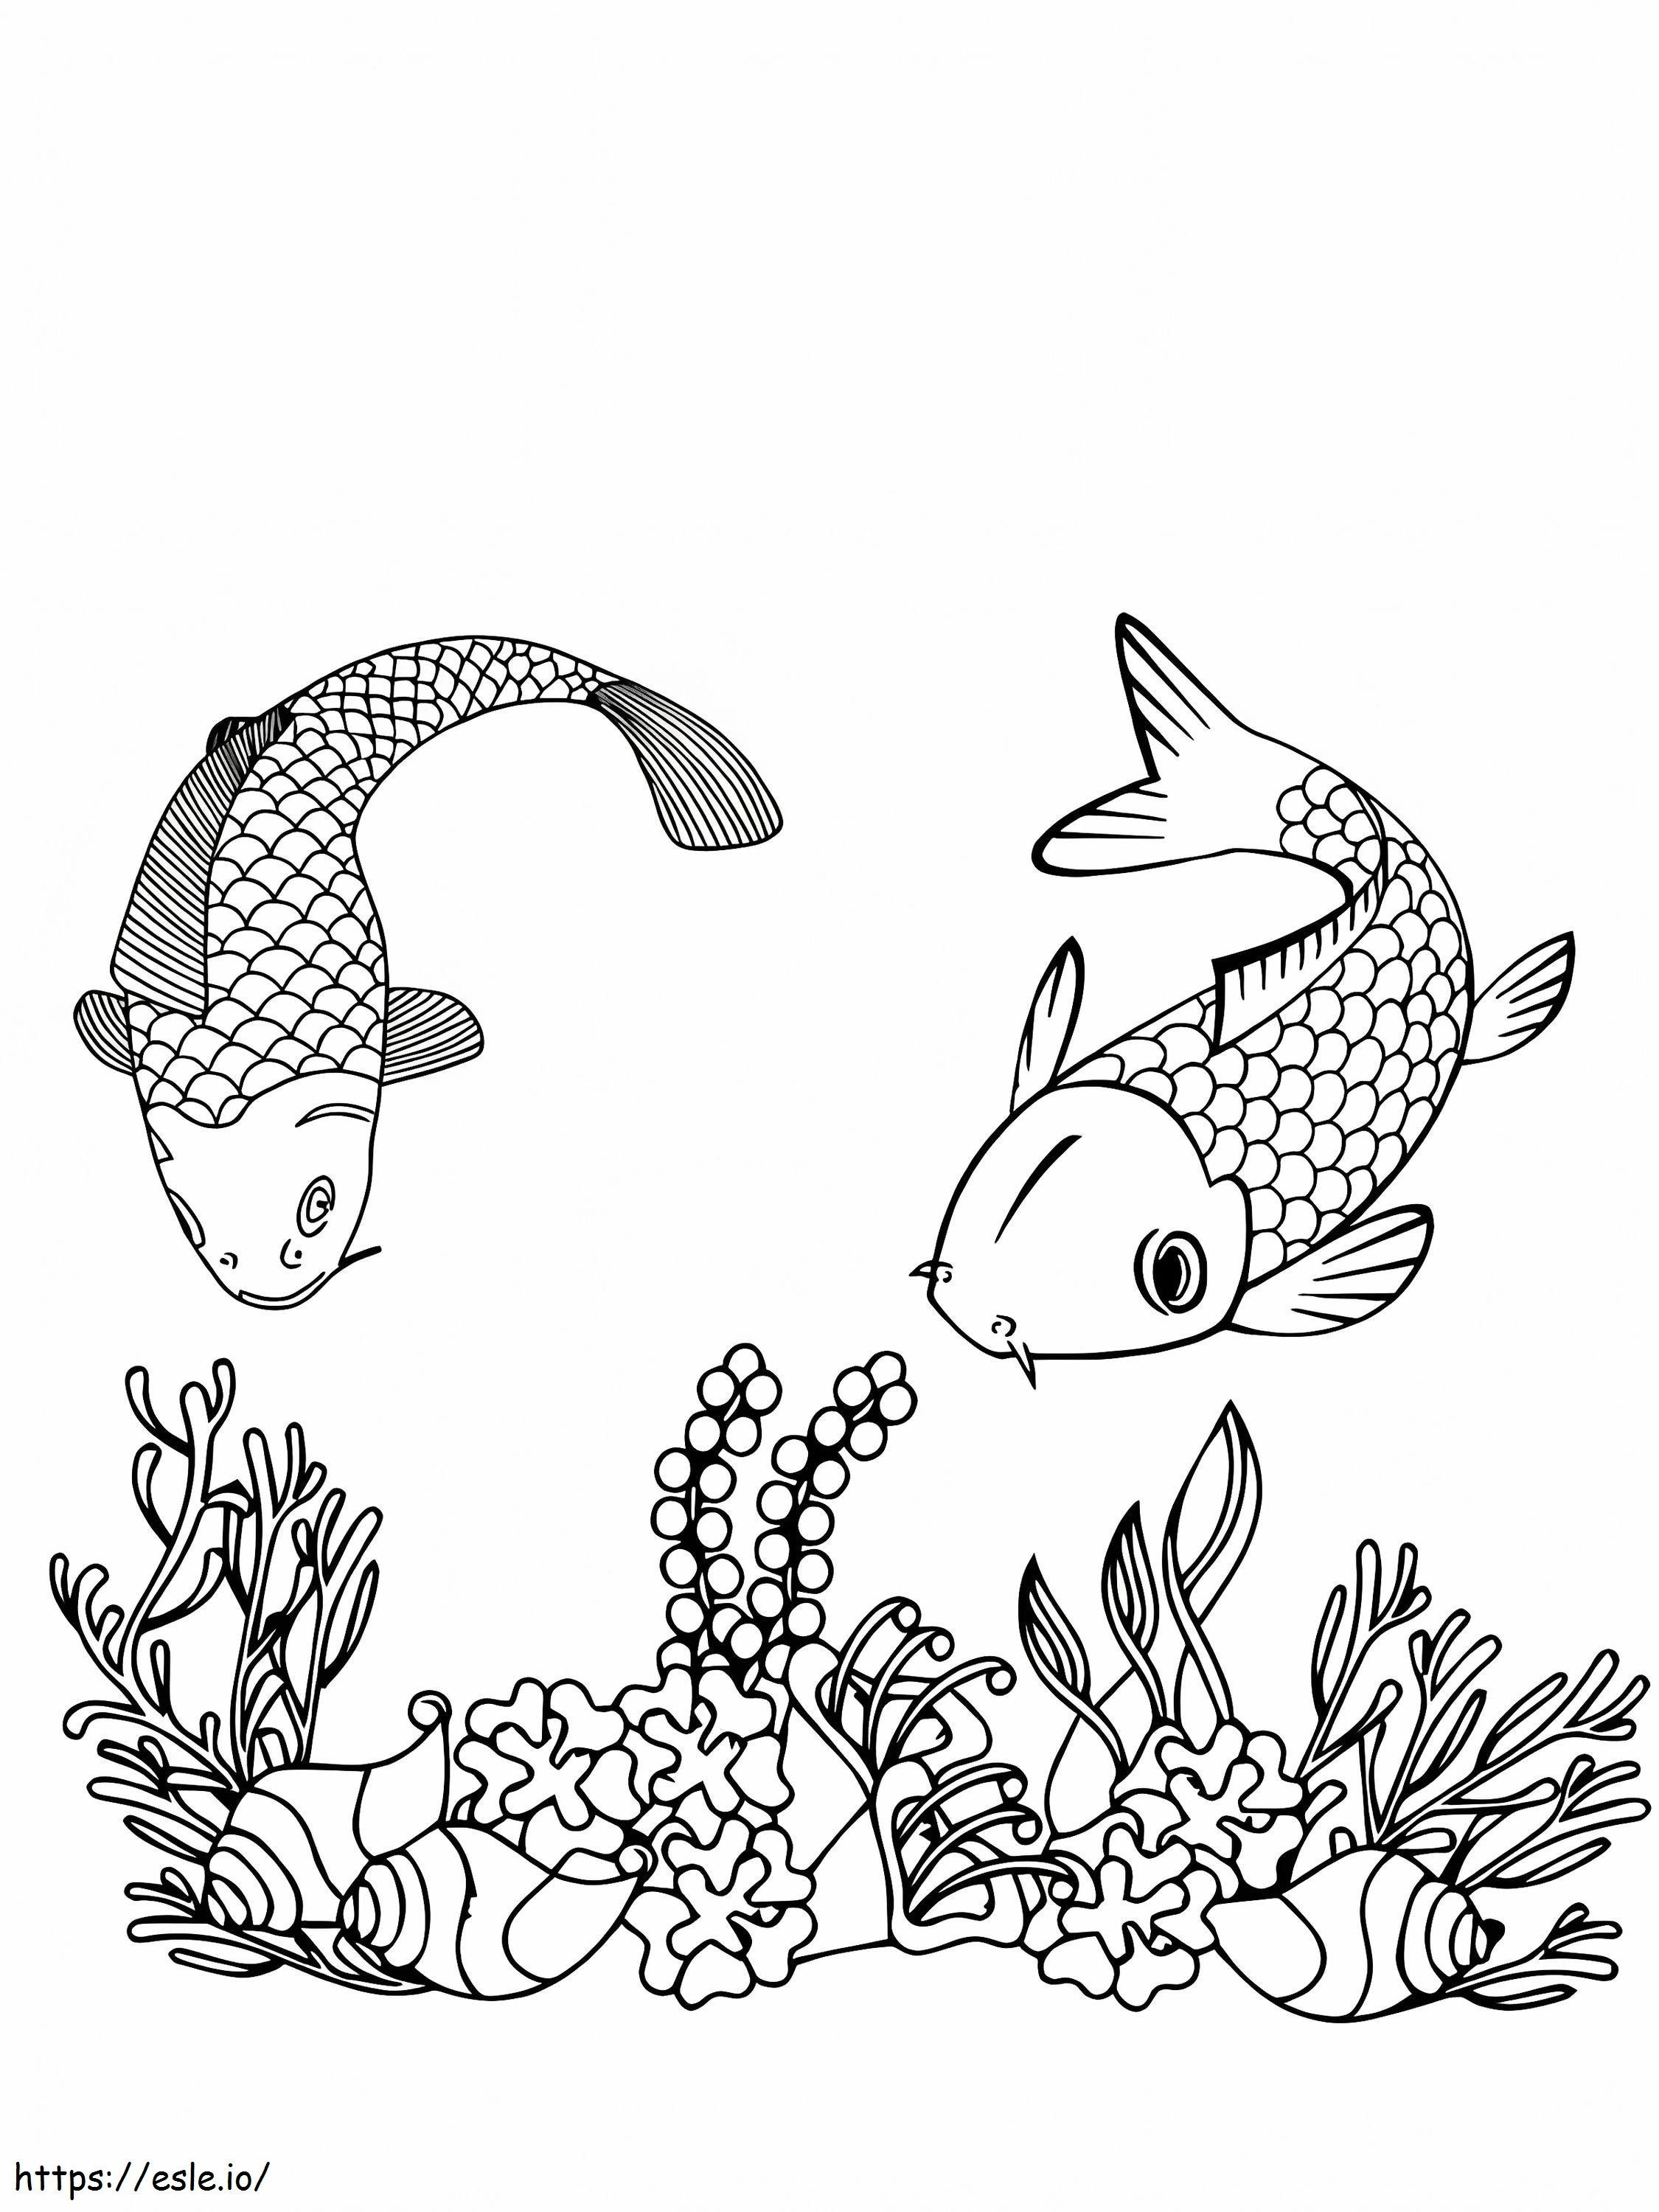 Koi Fishes And Corals coloring page